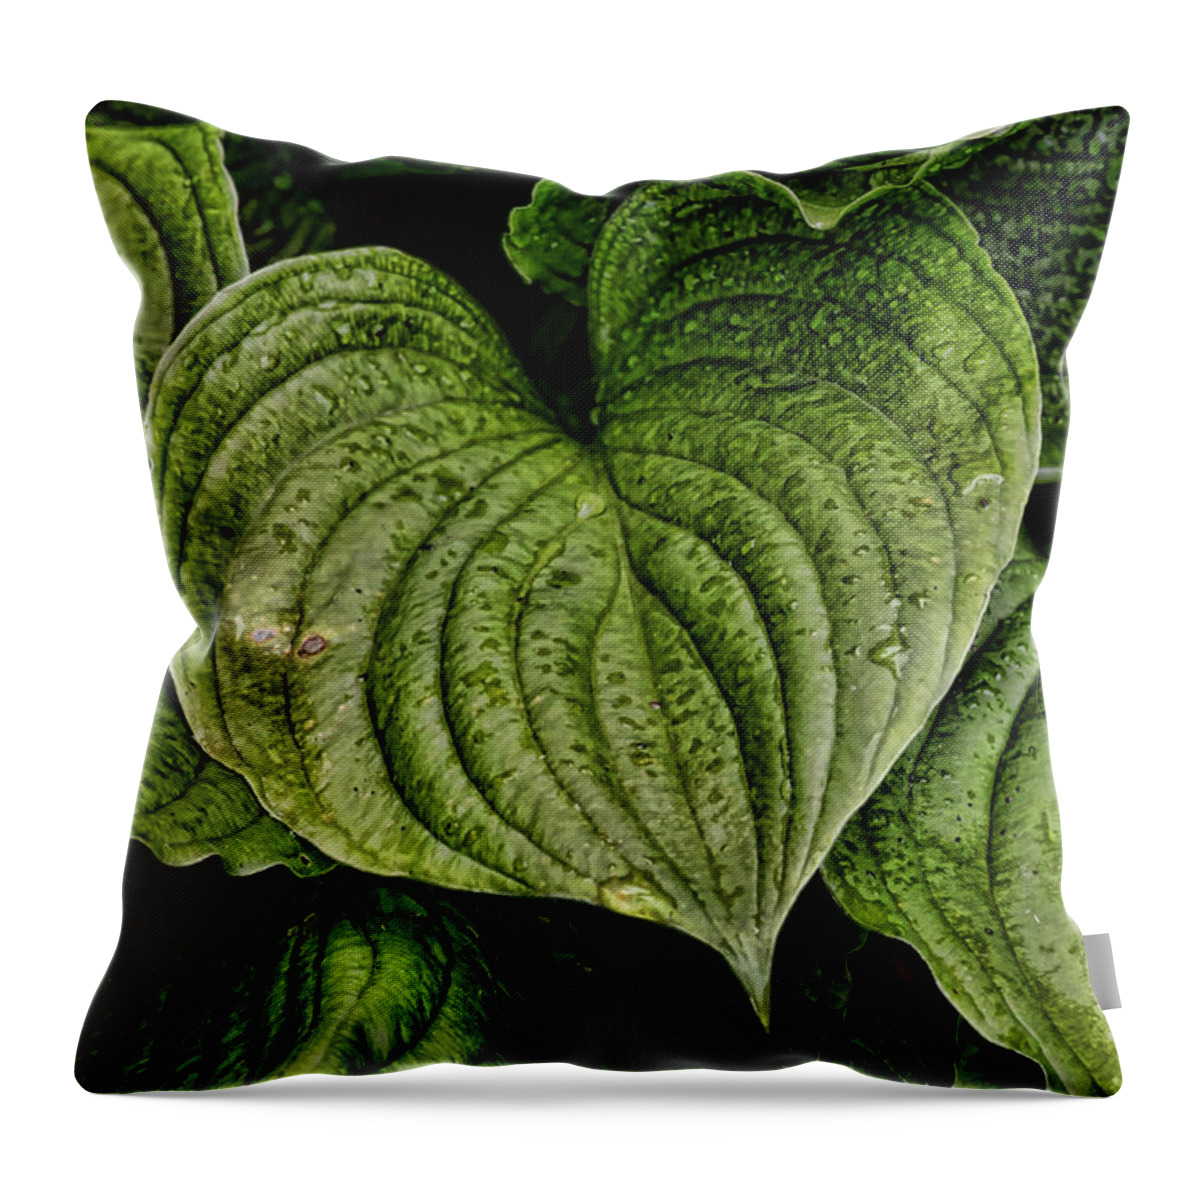 Leaf Throw Pillow featuring the photograph Leaf Heart by Kerri Farley